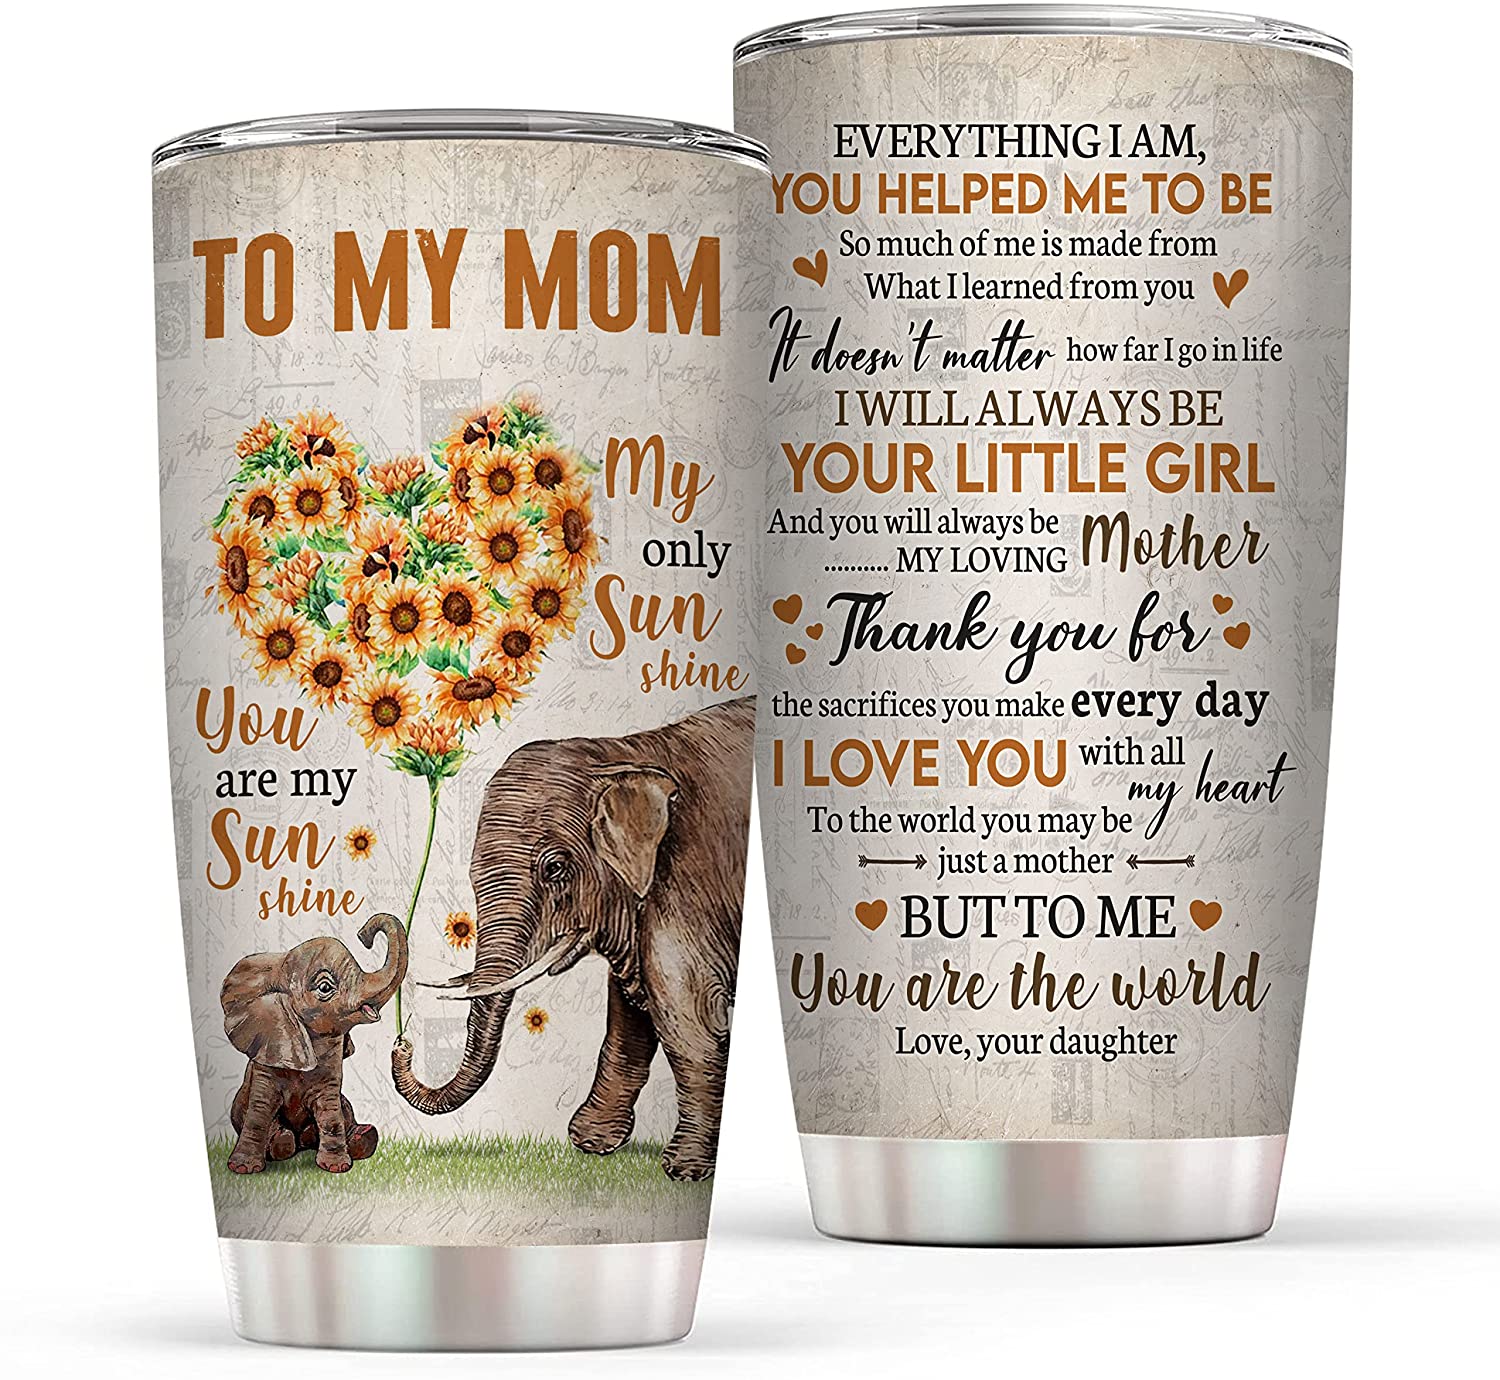 Mom Gifts from Daughters - 20oz Stainless Steel Insulated Elephant Tum